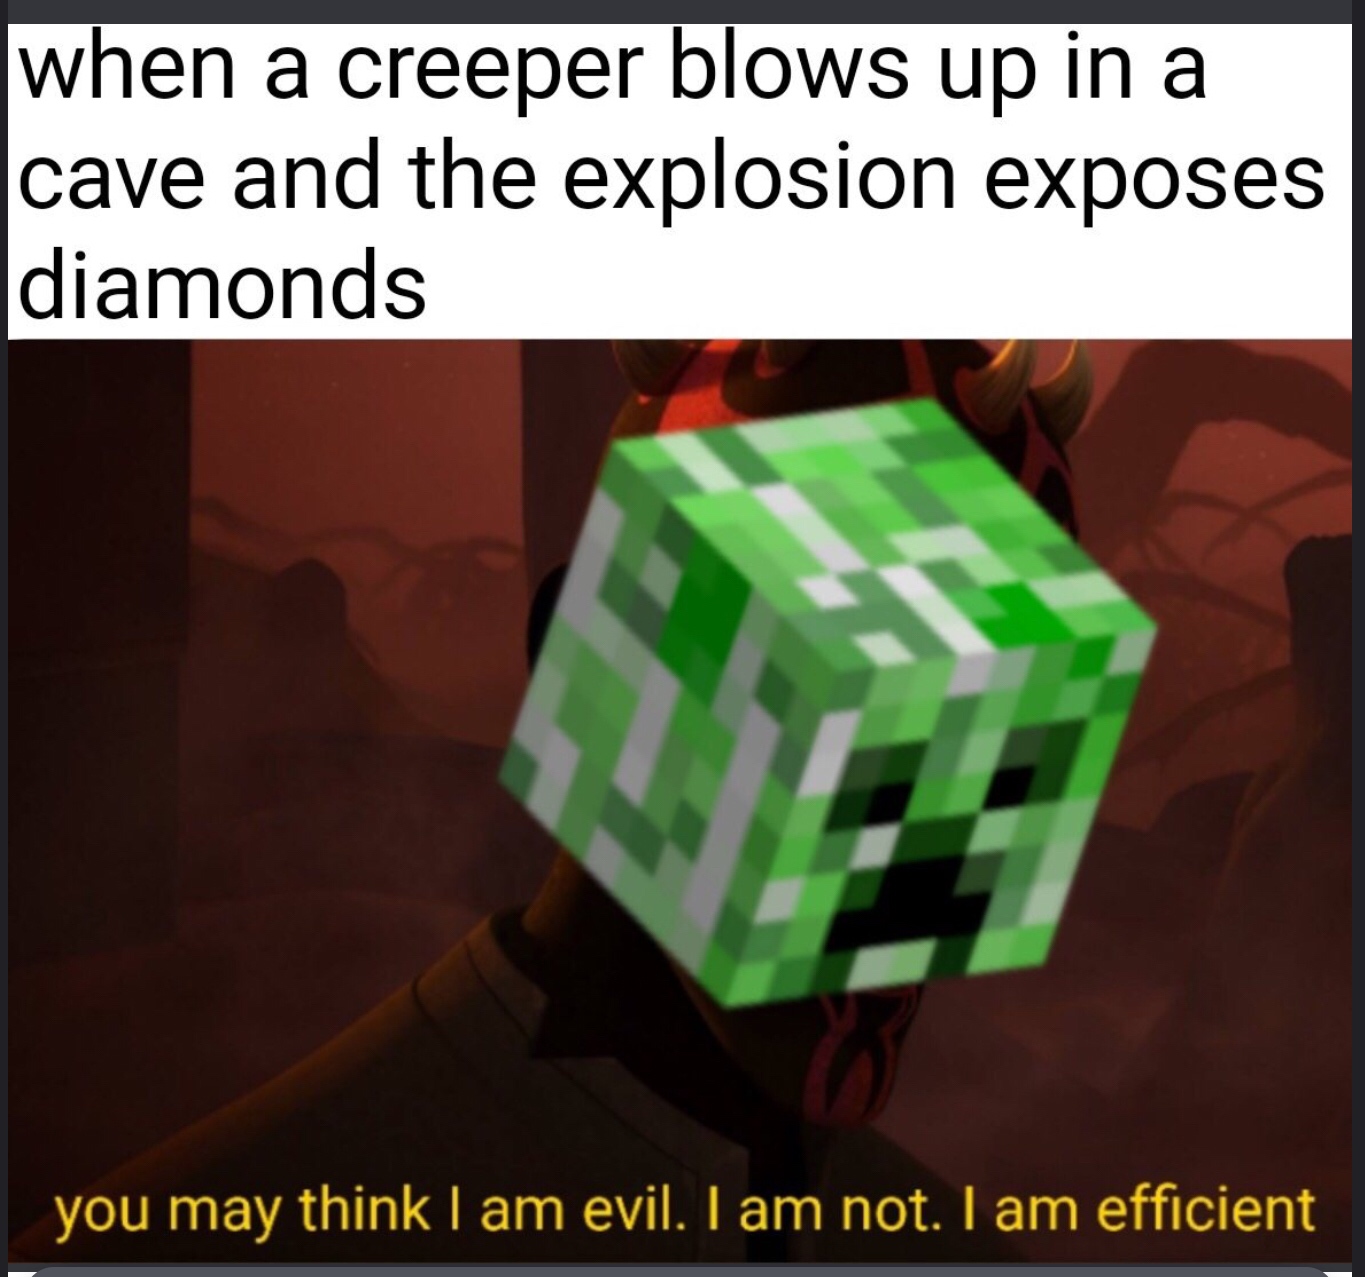 perhaps i treated you too harshly - when a creeper blows up in a cave and the explosion exposes diamonds you may think I am evil. I am not. I am efficient